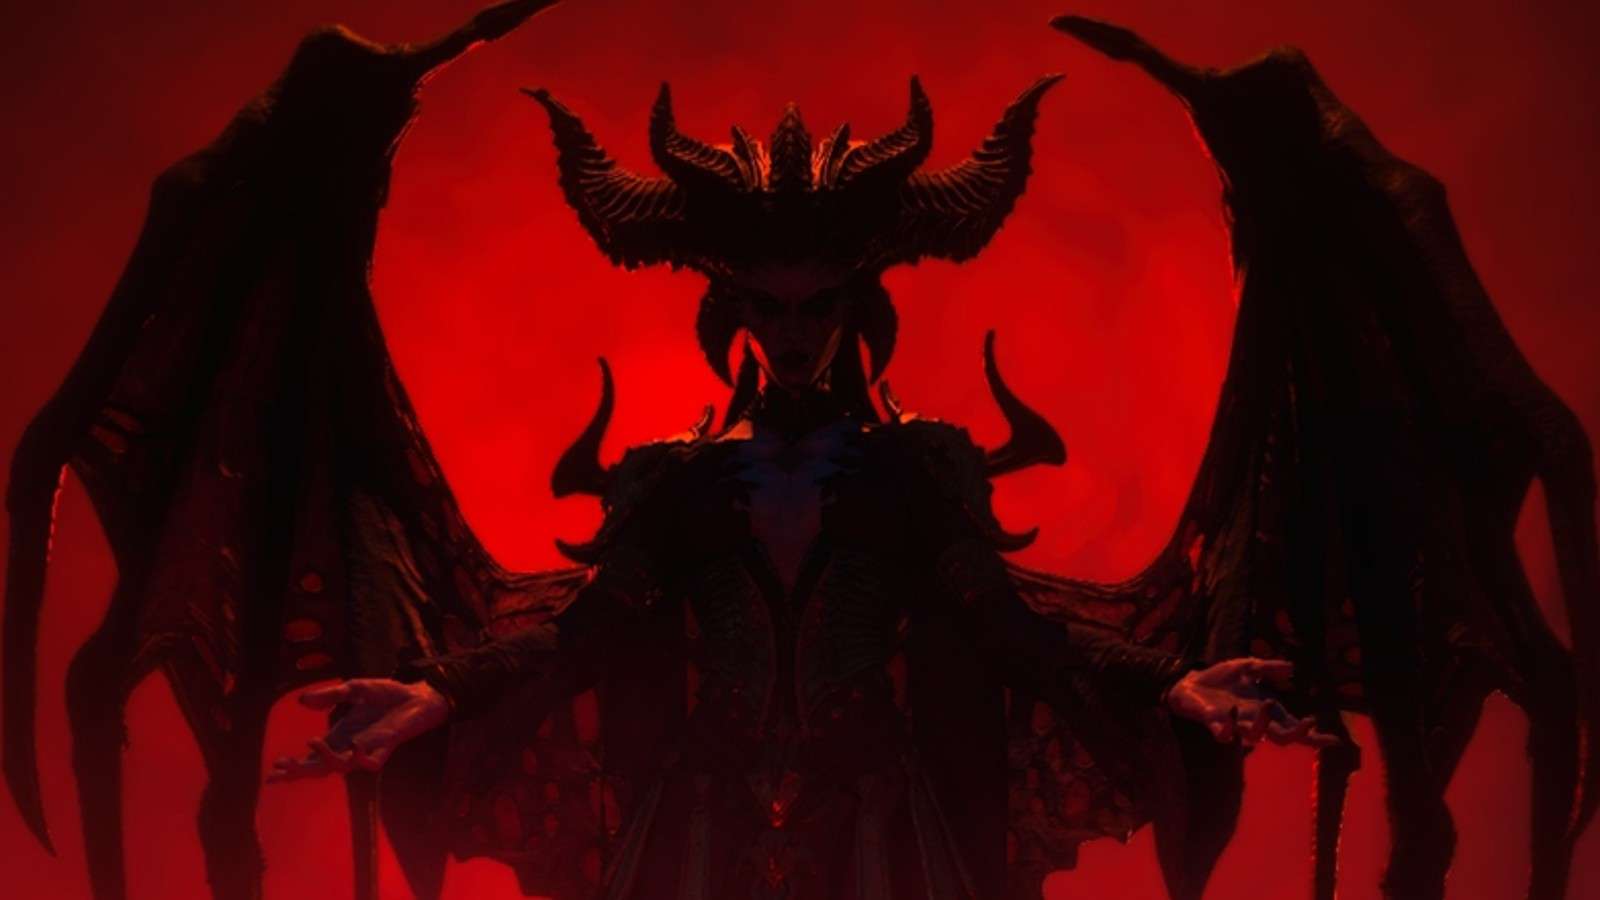 A promotional image from Diablo 4, a game which soundtrack has just been released.